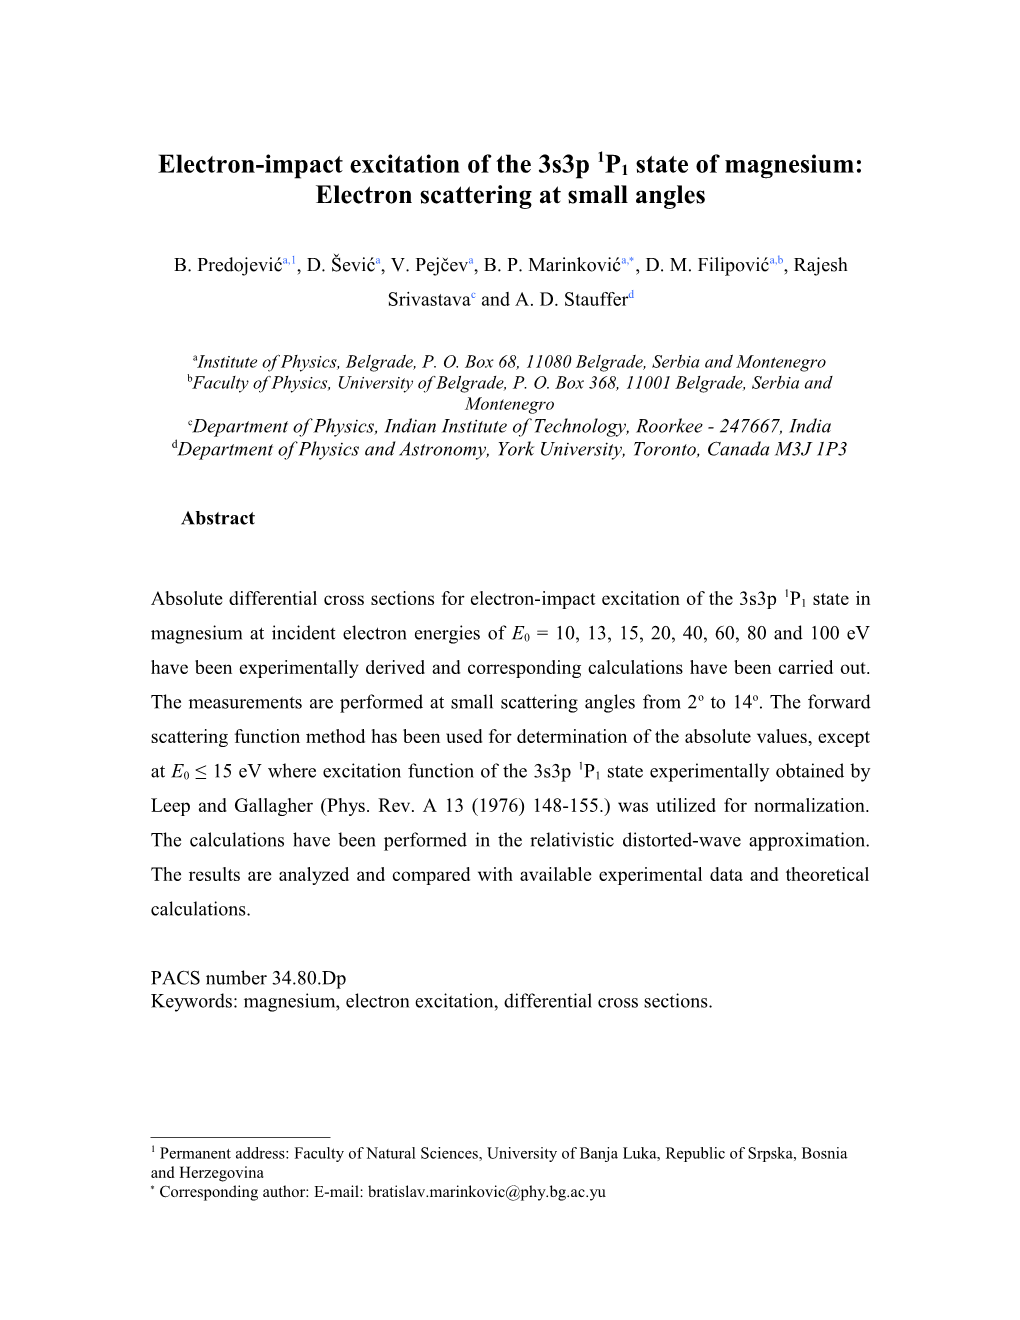 Excitation of the 1P1 State of Magnesium by Electron Impact at Small Scattering Angles s1